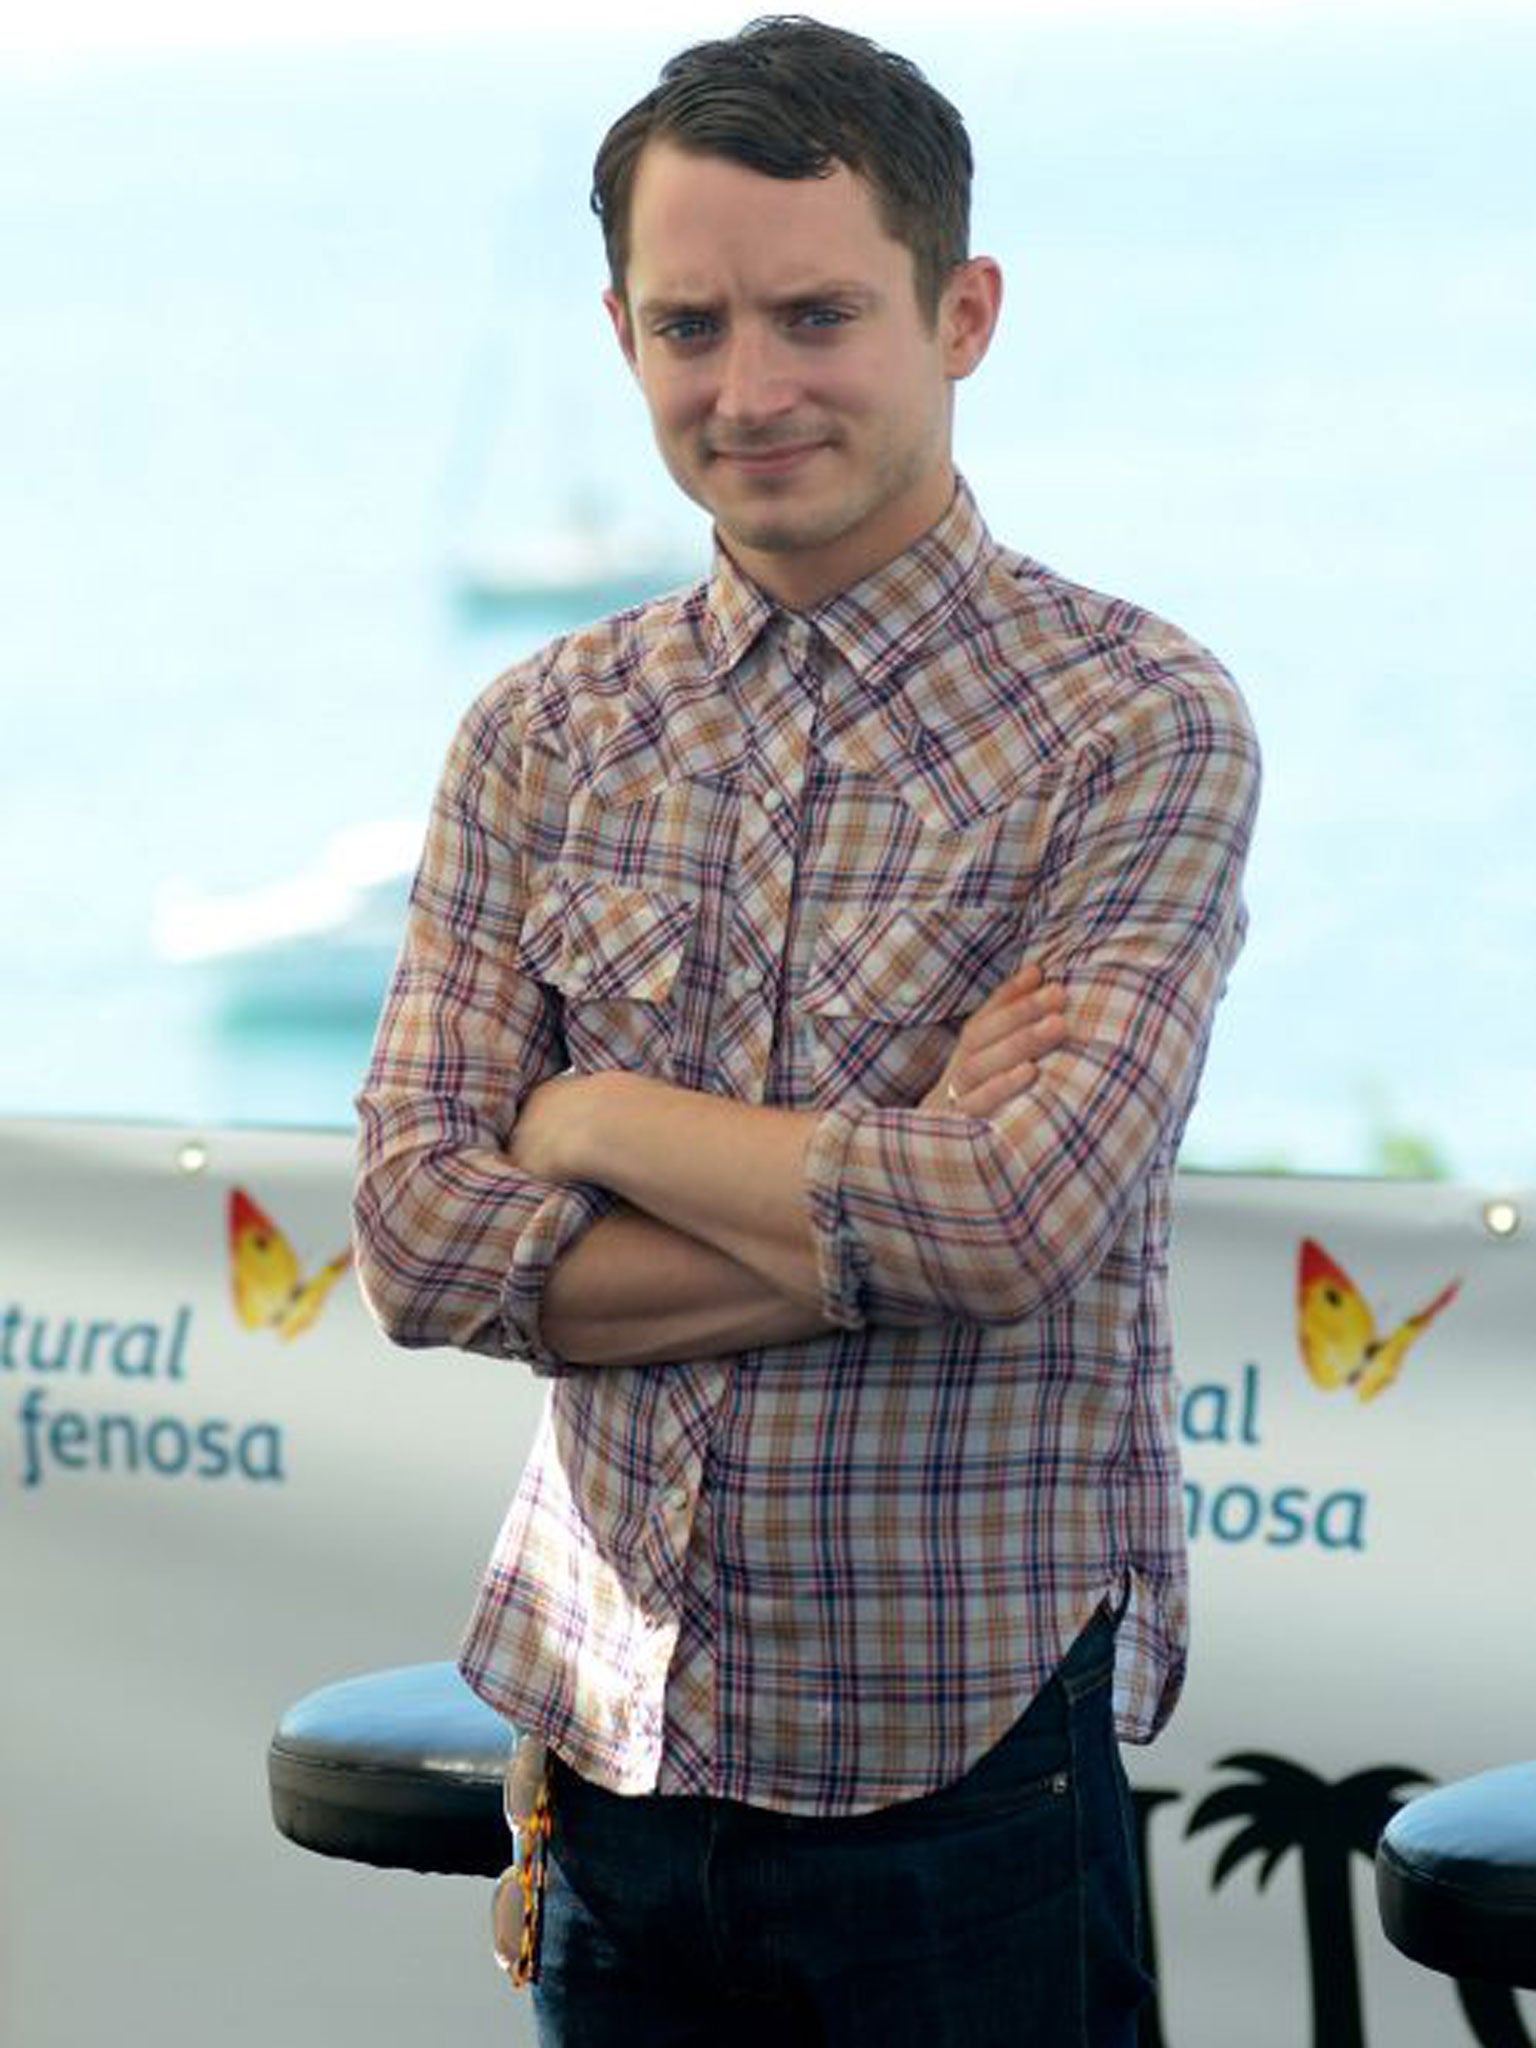 Actor Elijah Wood poses at the 45th Sitges Film Festival on October 6, 2012 in Sitges, Spain